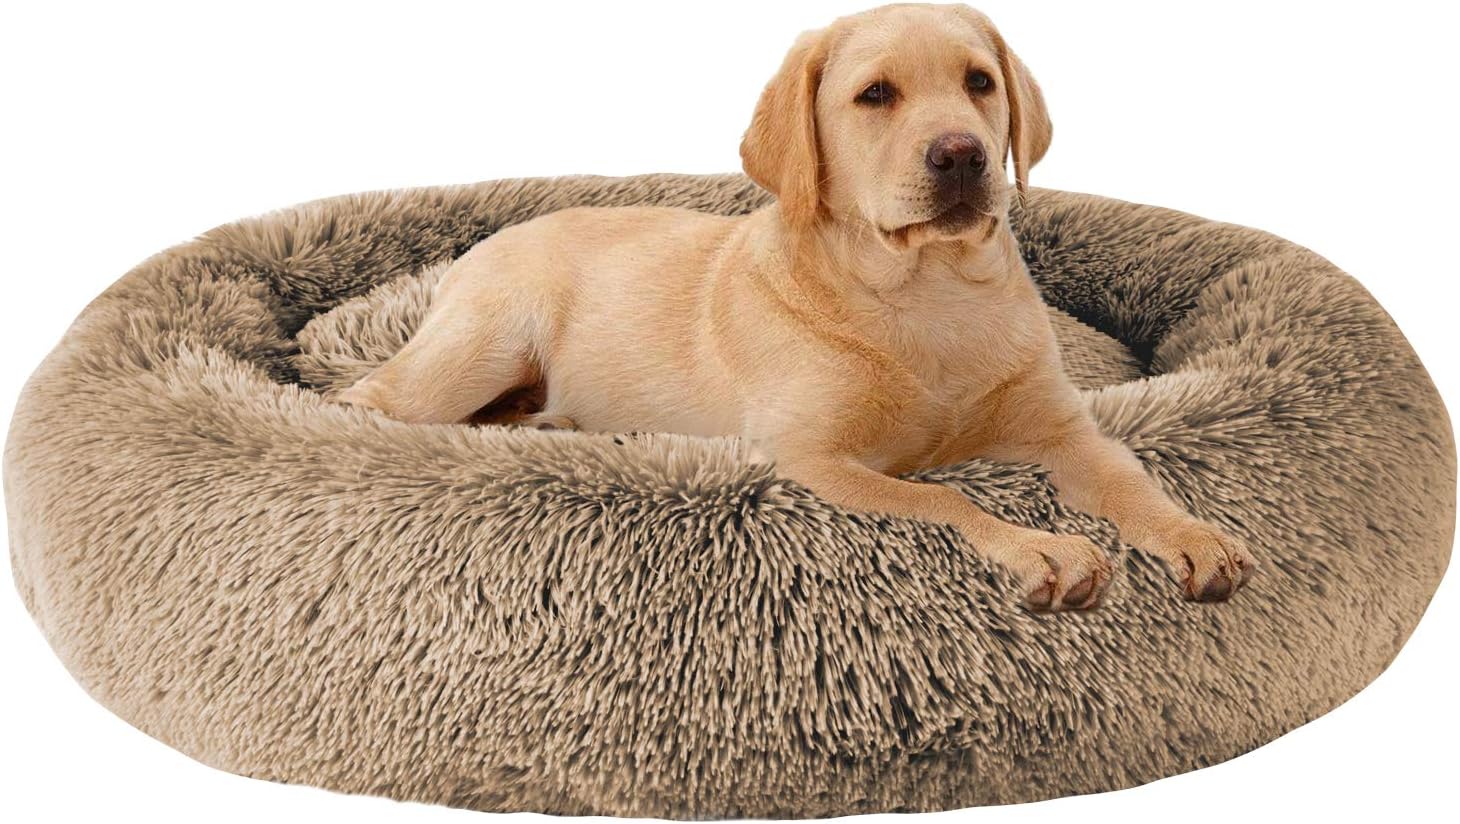 MFOX Calming Dog Bed (L/XL/XXL/XXXL) for Medium and Large Dogs Comfortable Pet Bed Faux Fur Donut Cuddler Up to 25/35/55/100lbs…